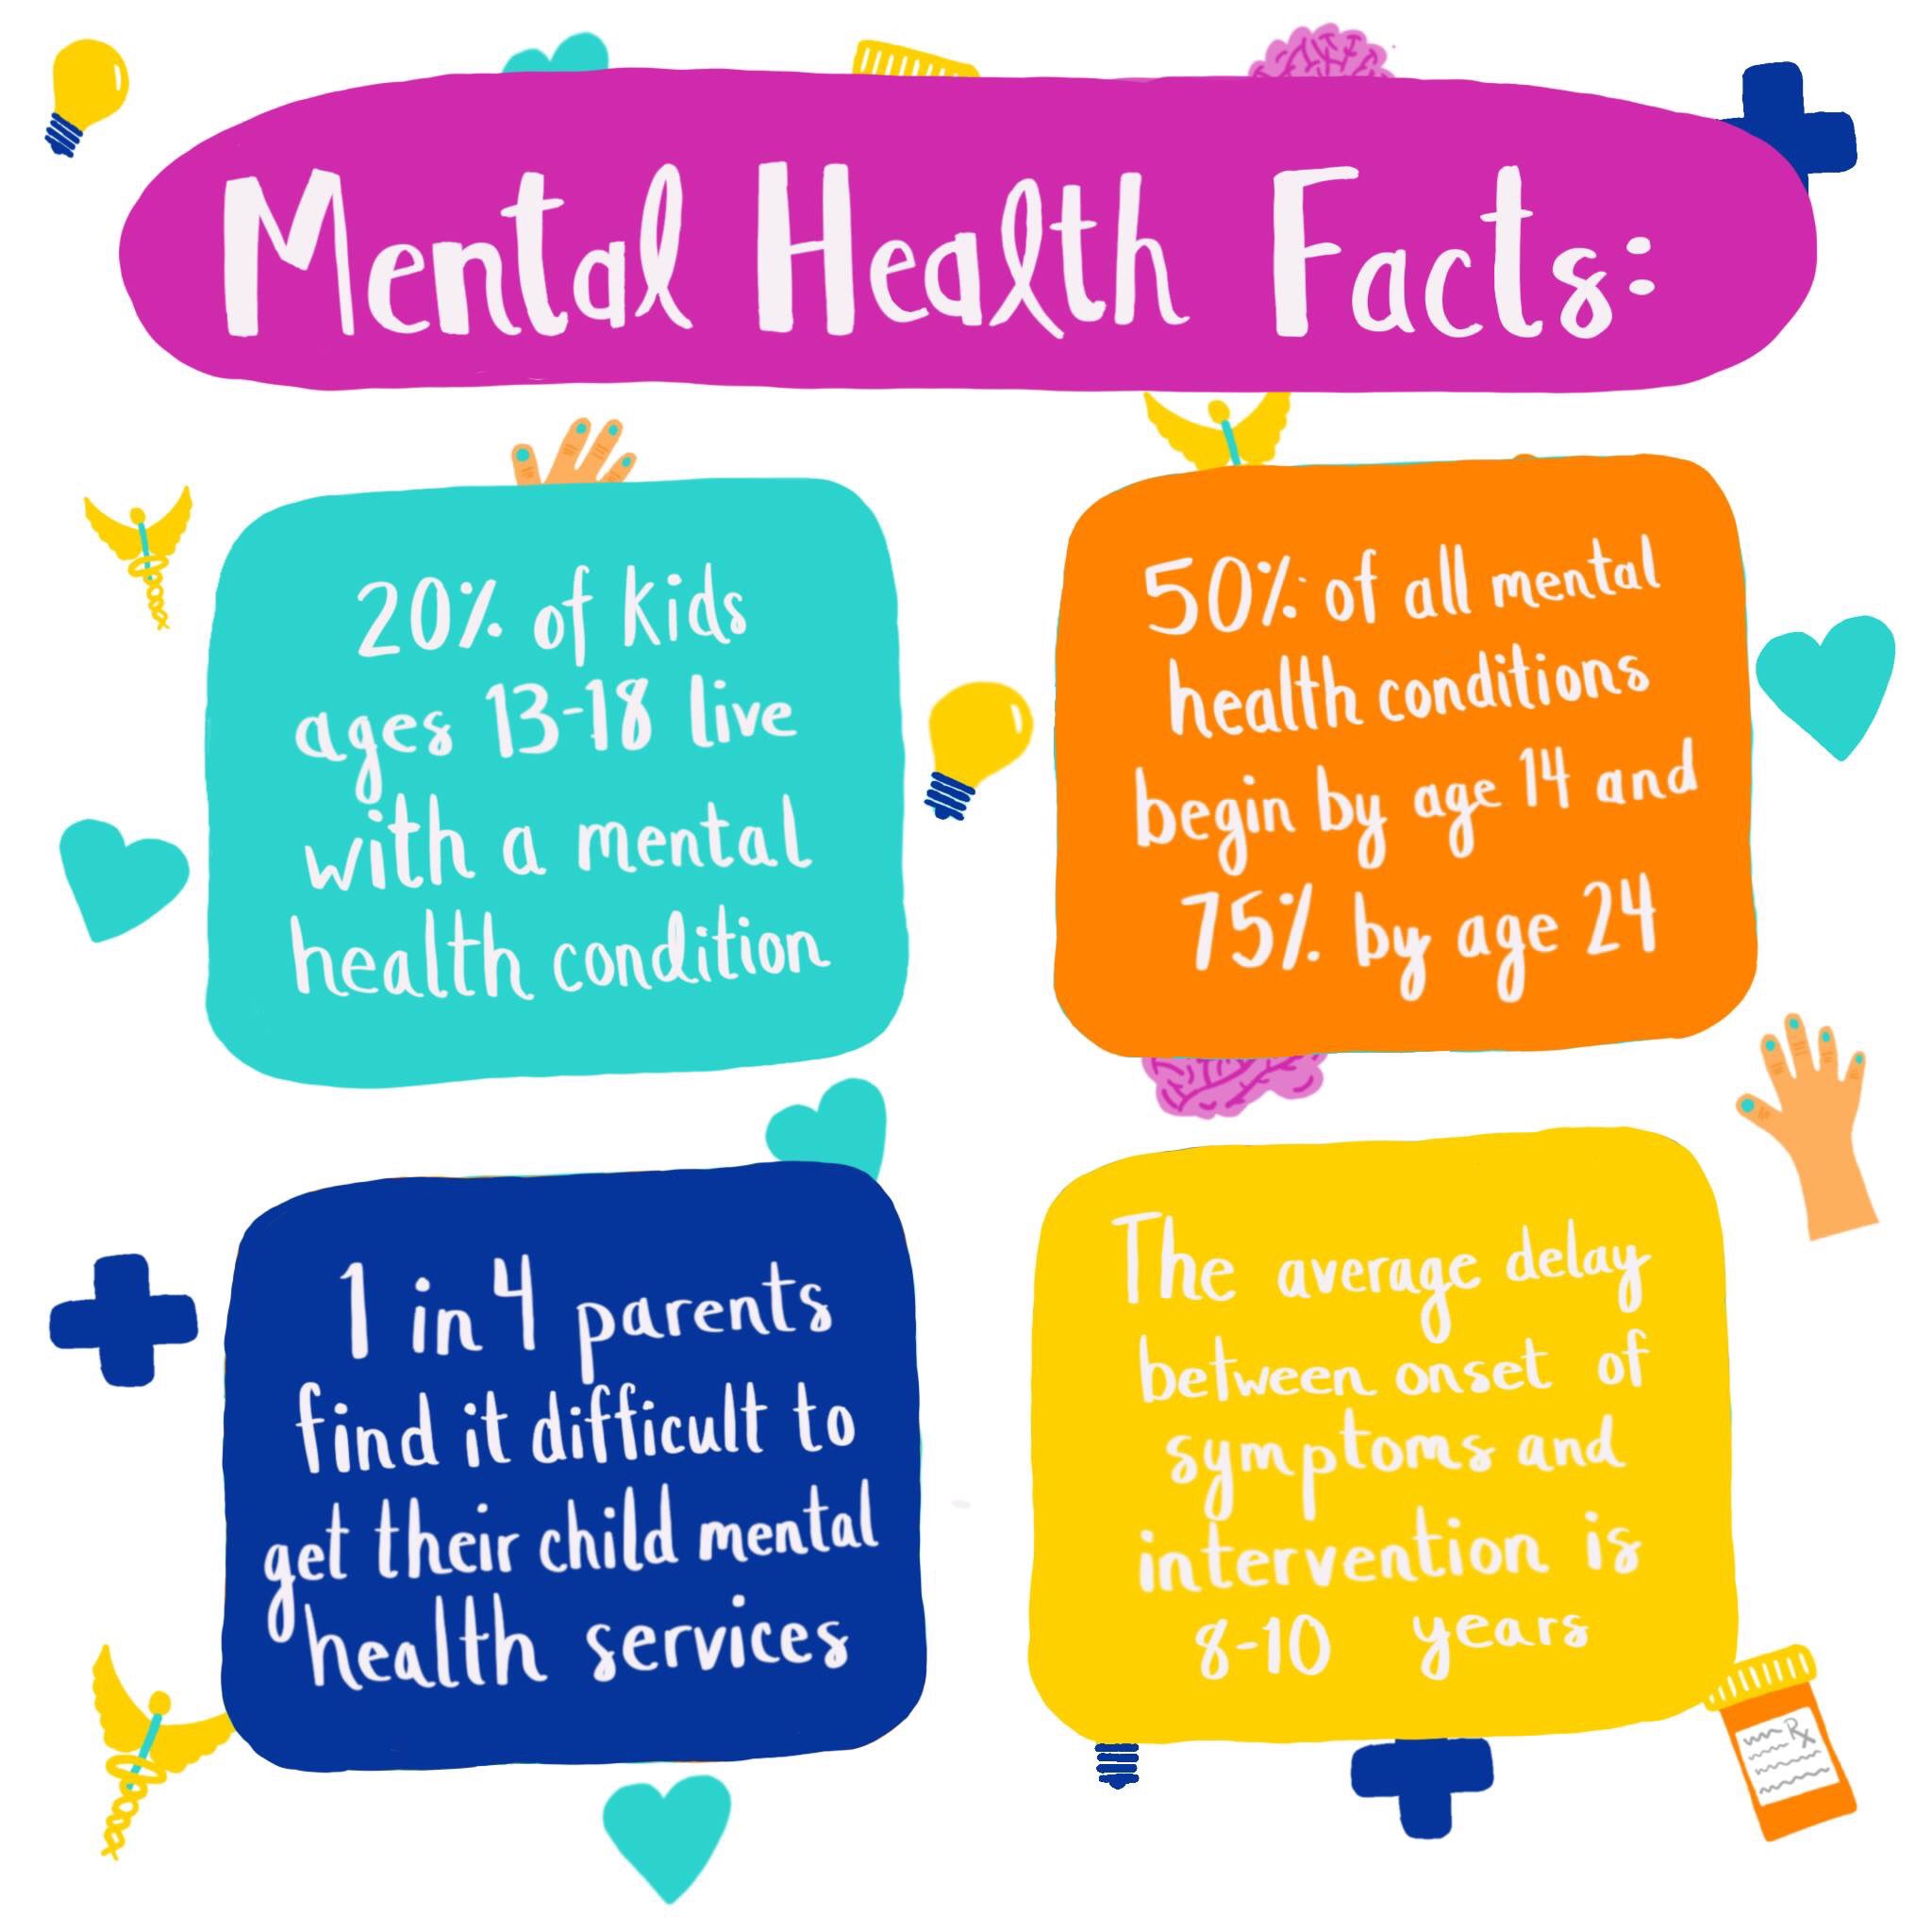 mental health facts: 20% of kids ages 13-18 live with a mental health condition, 50% of all mental health conditions begin by age 14 75% by age 24, 1 in 4 parents find it difficult to get their child mental health services, the average delay between onset of symptoms and intervention is 8-10 years